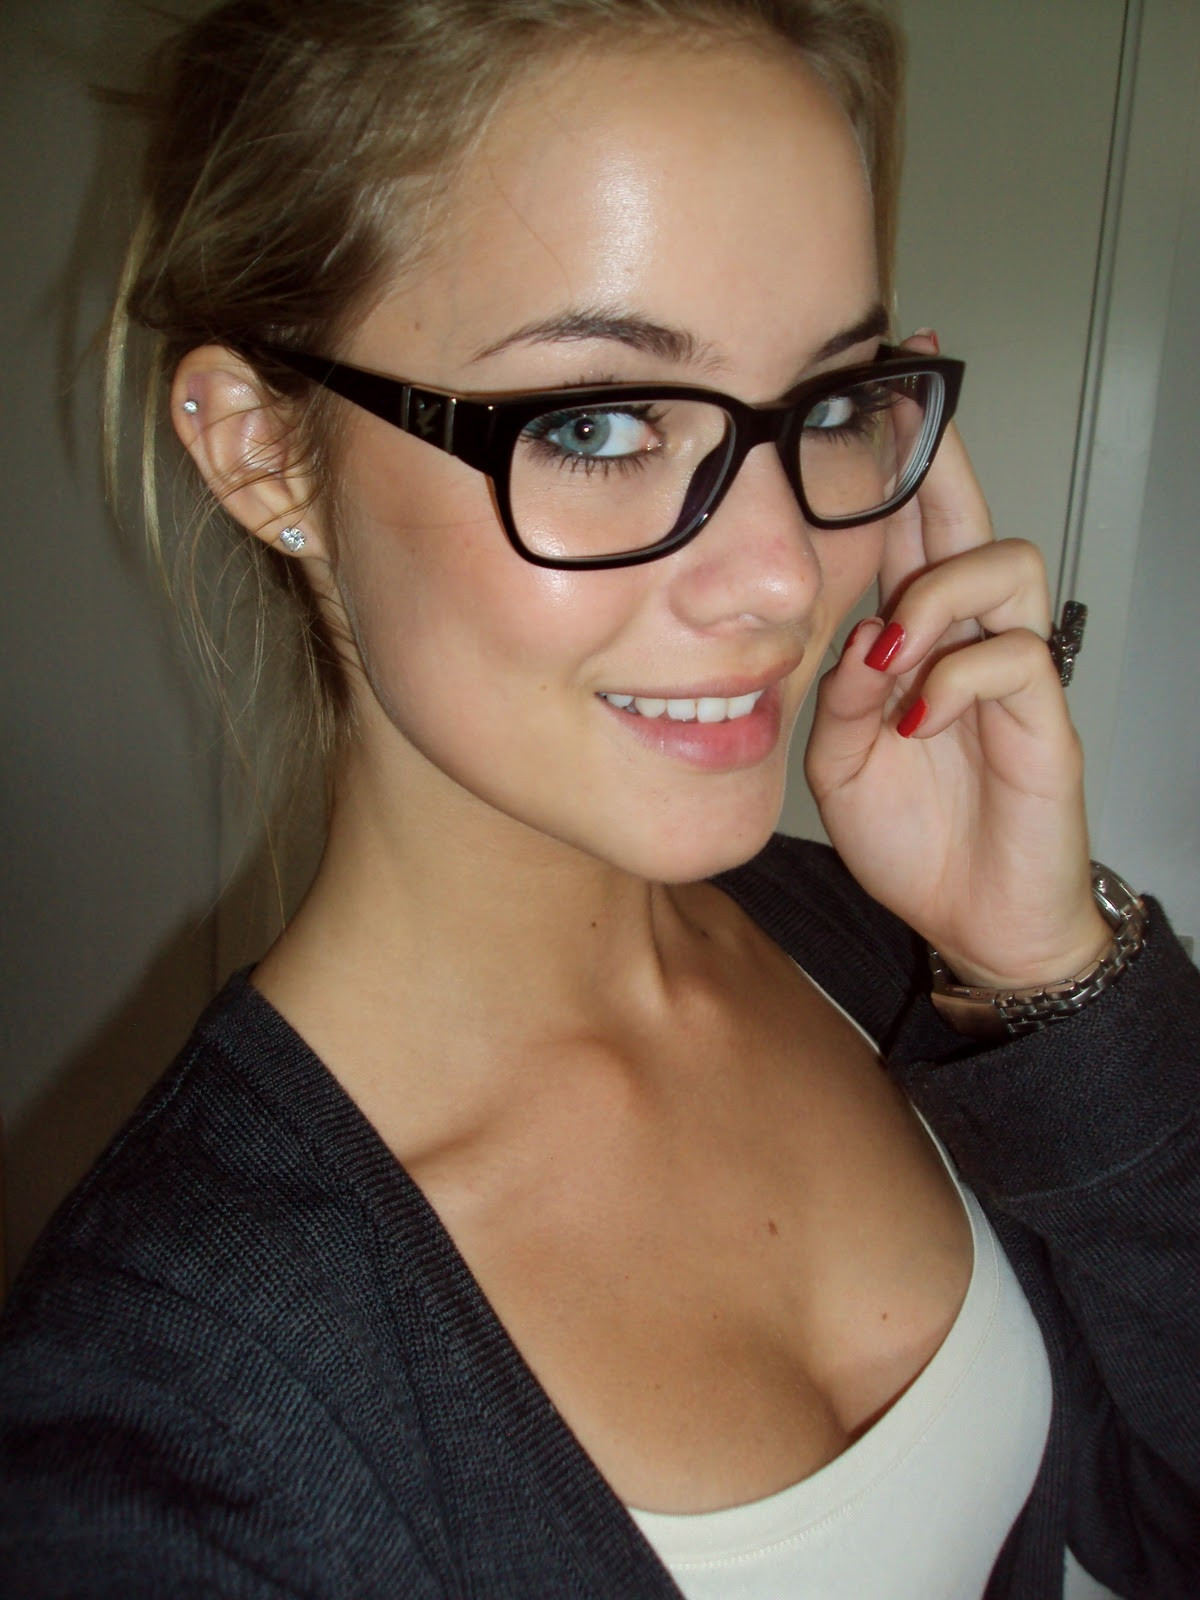 Porn Girls With Glasses